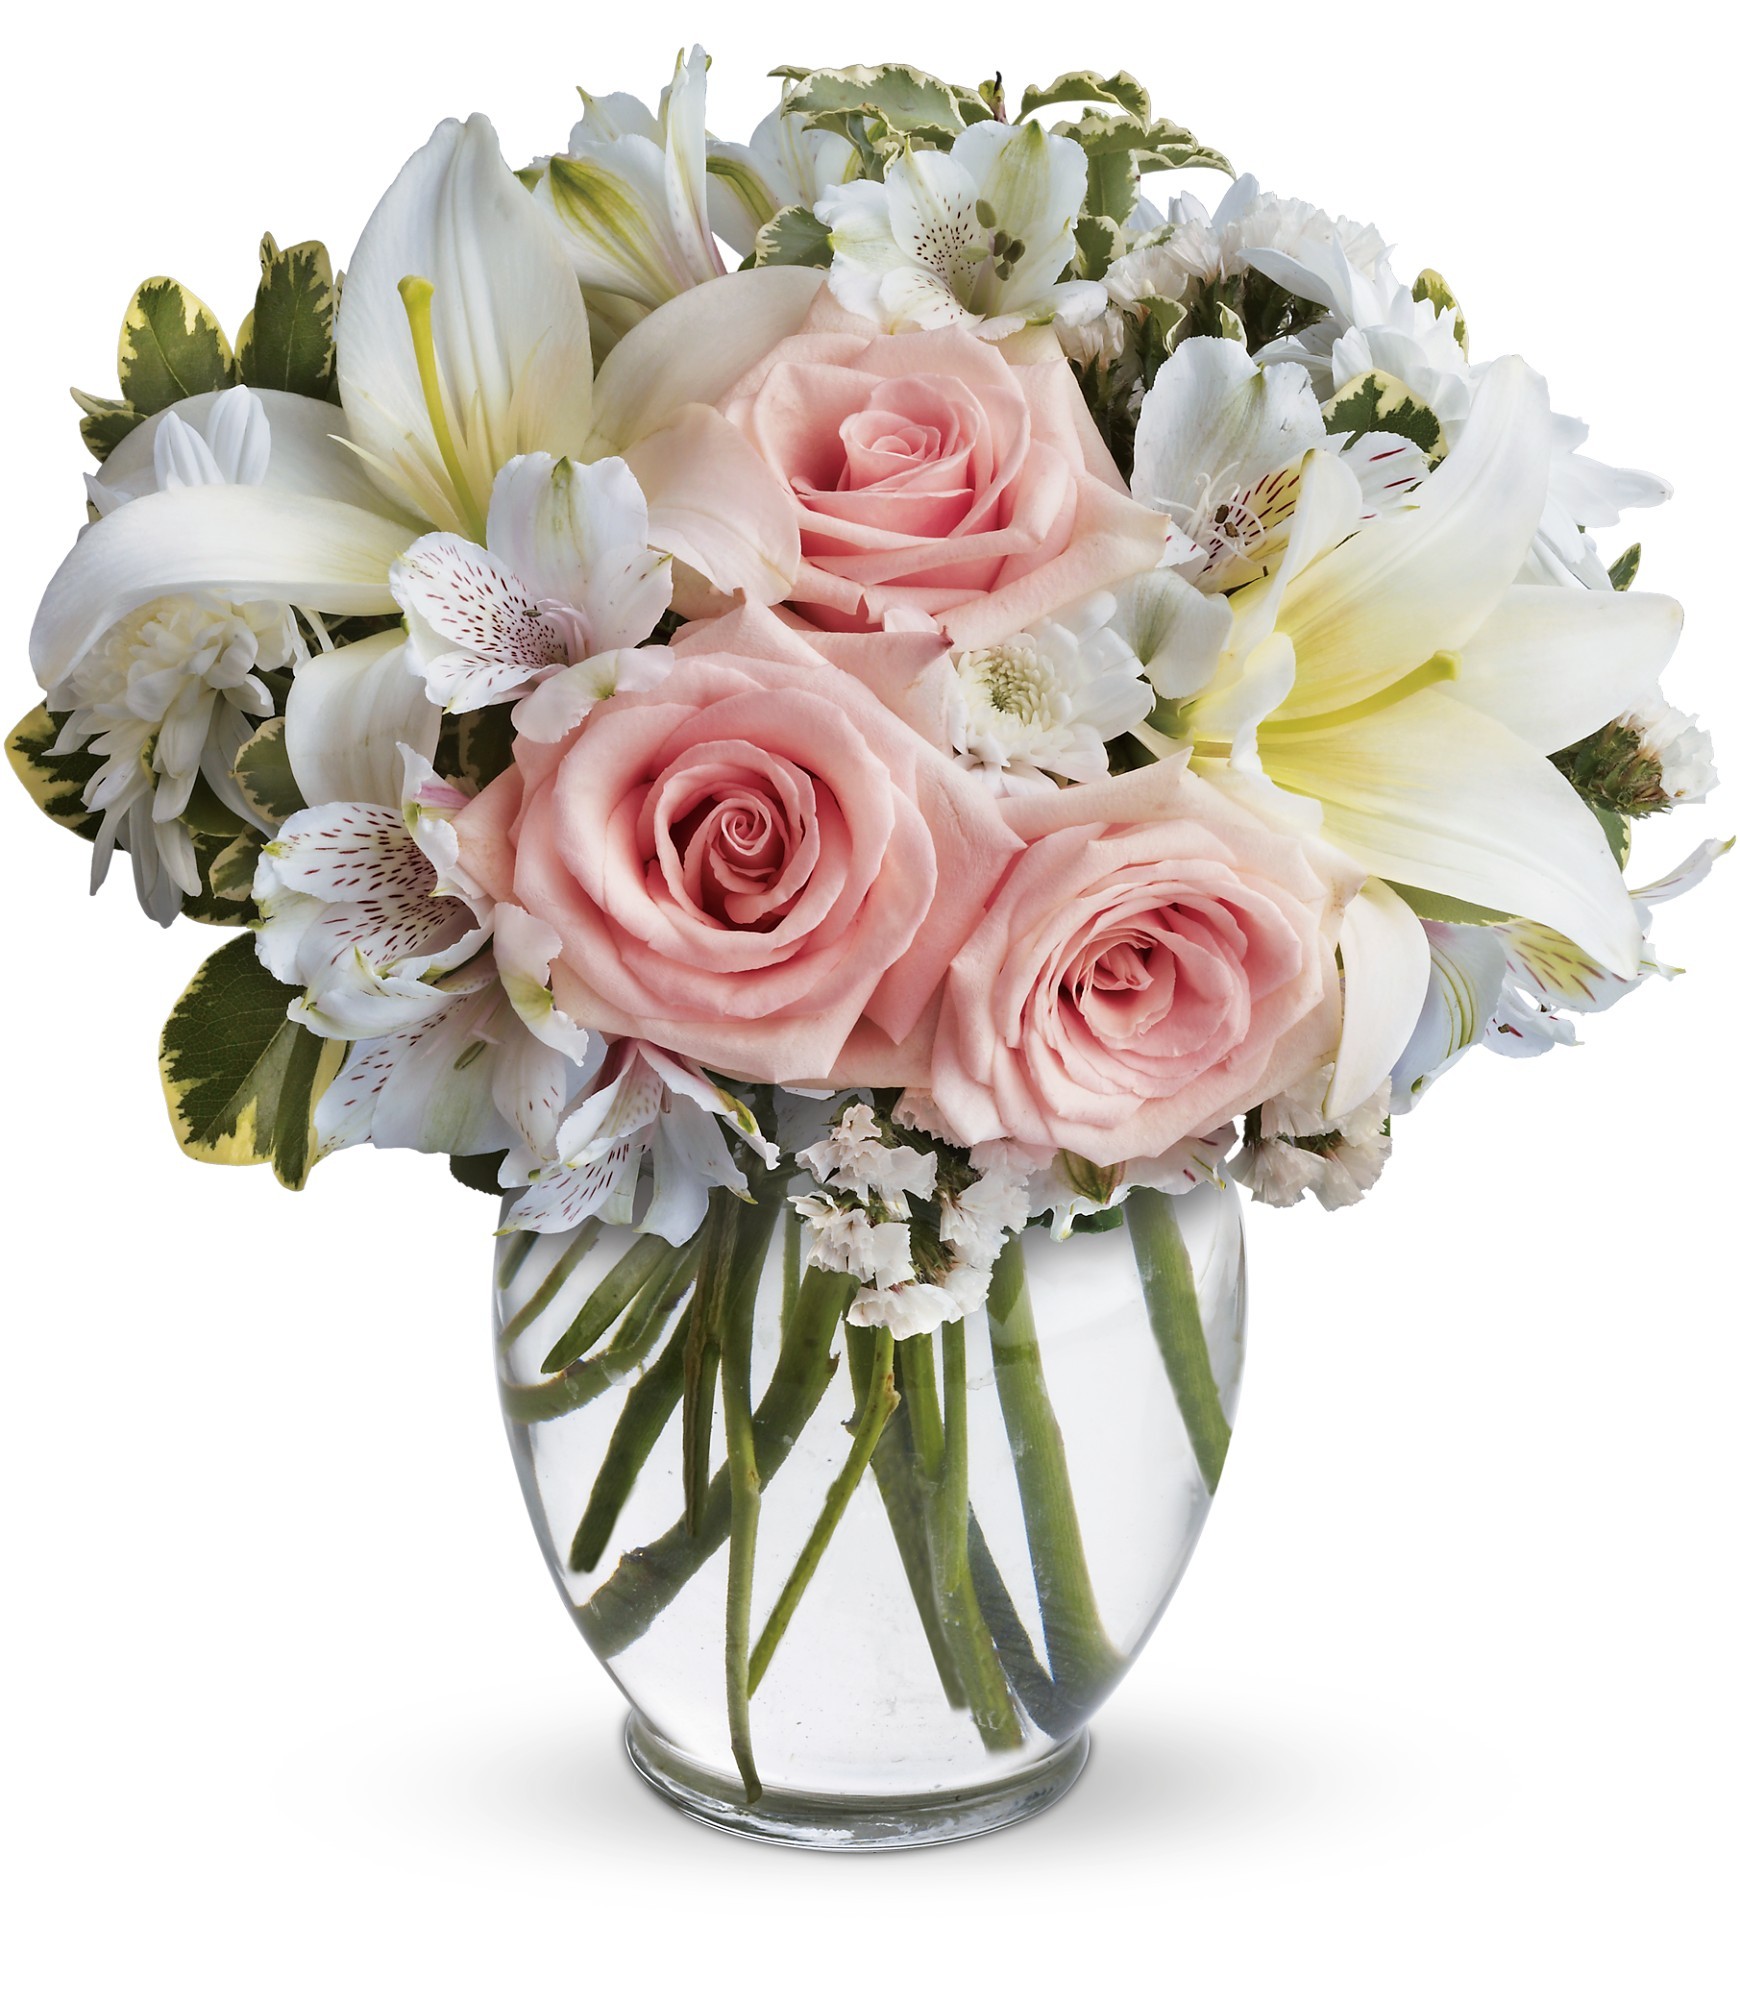 Bouquet of flowers photo